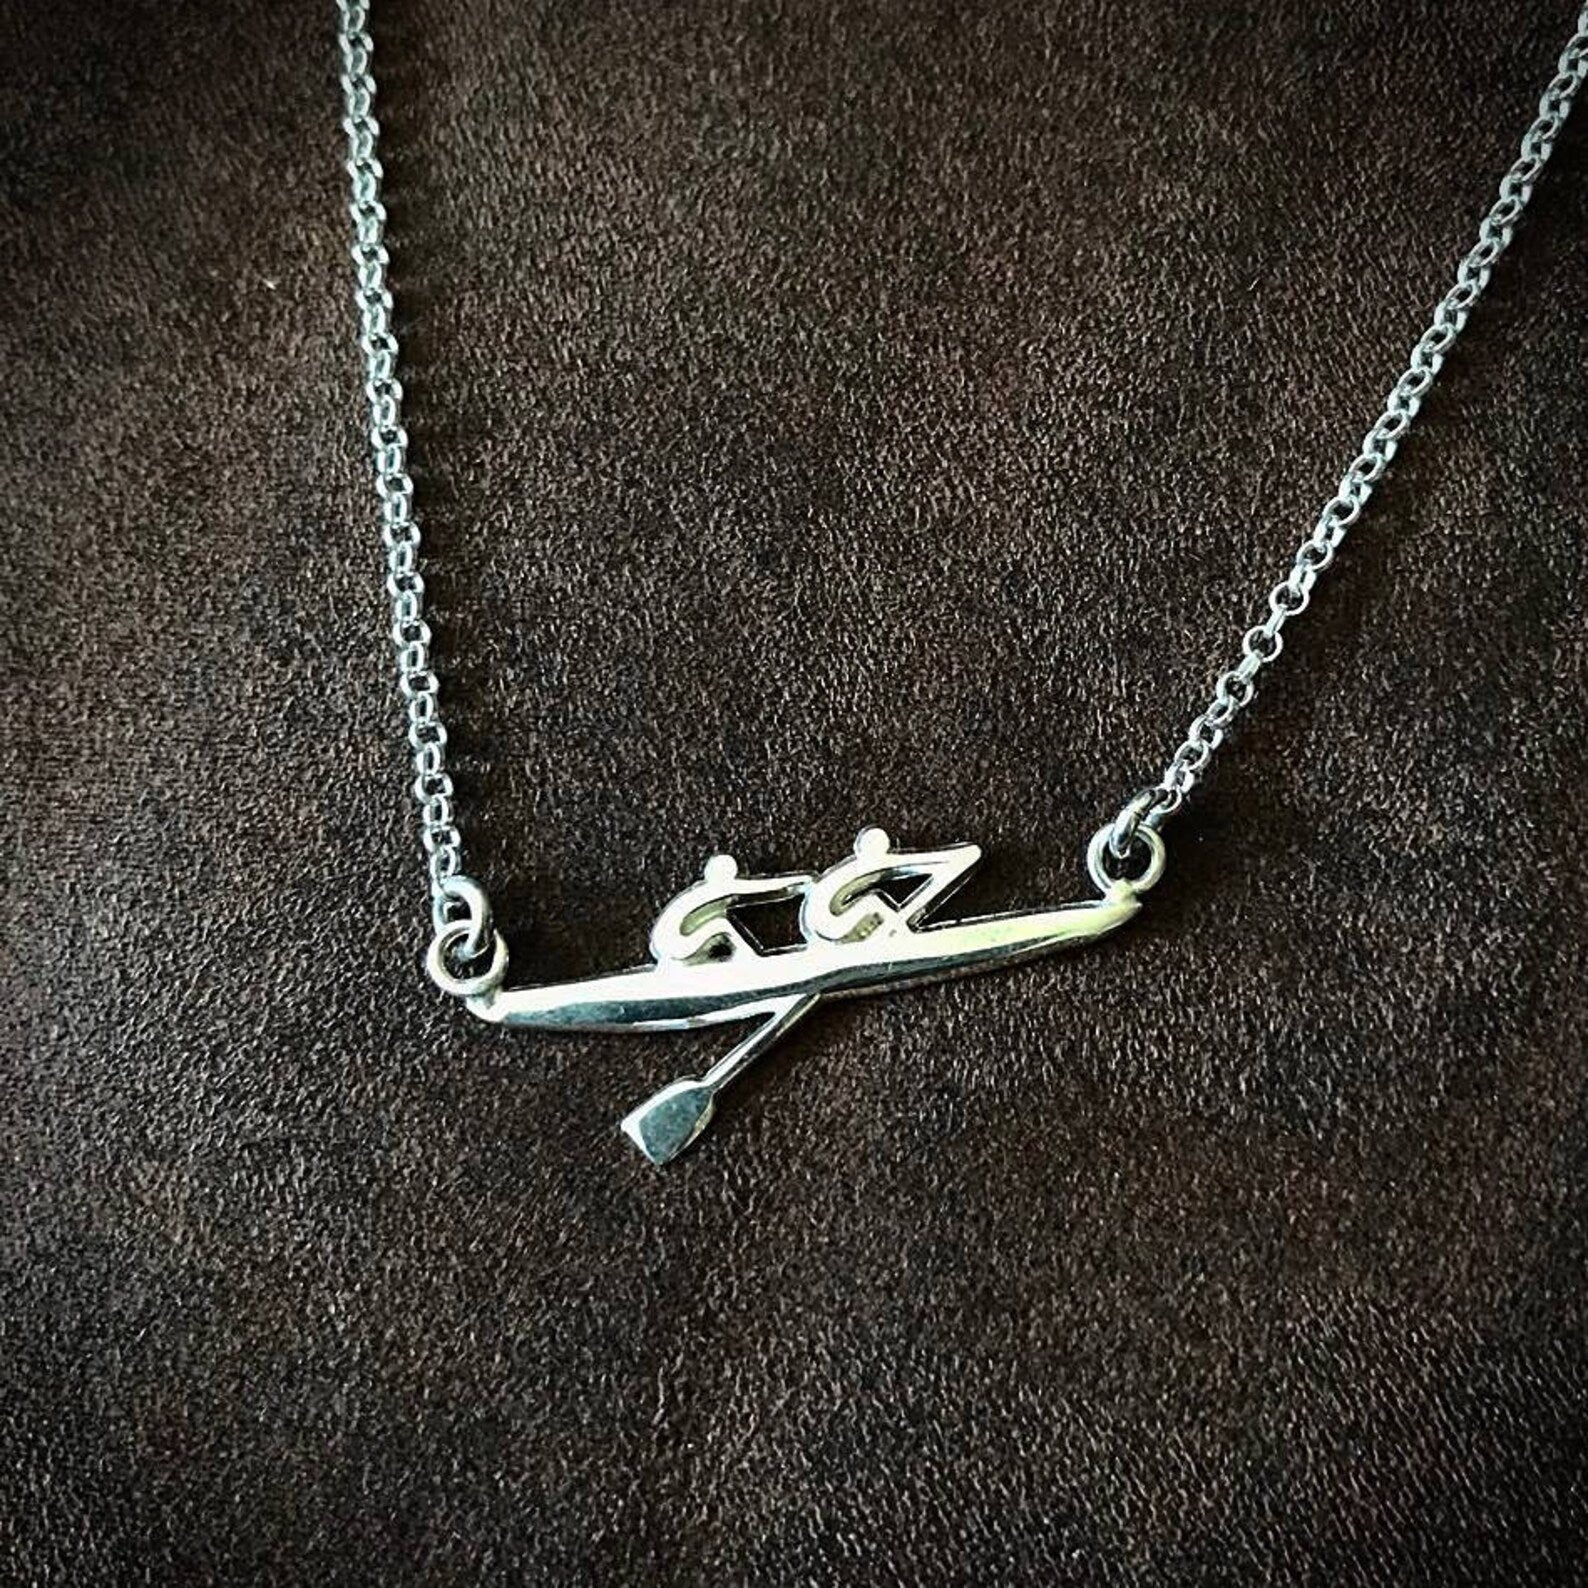 Rowing Pair Necklace